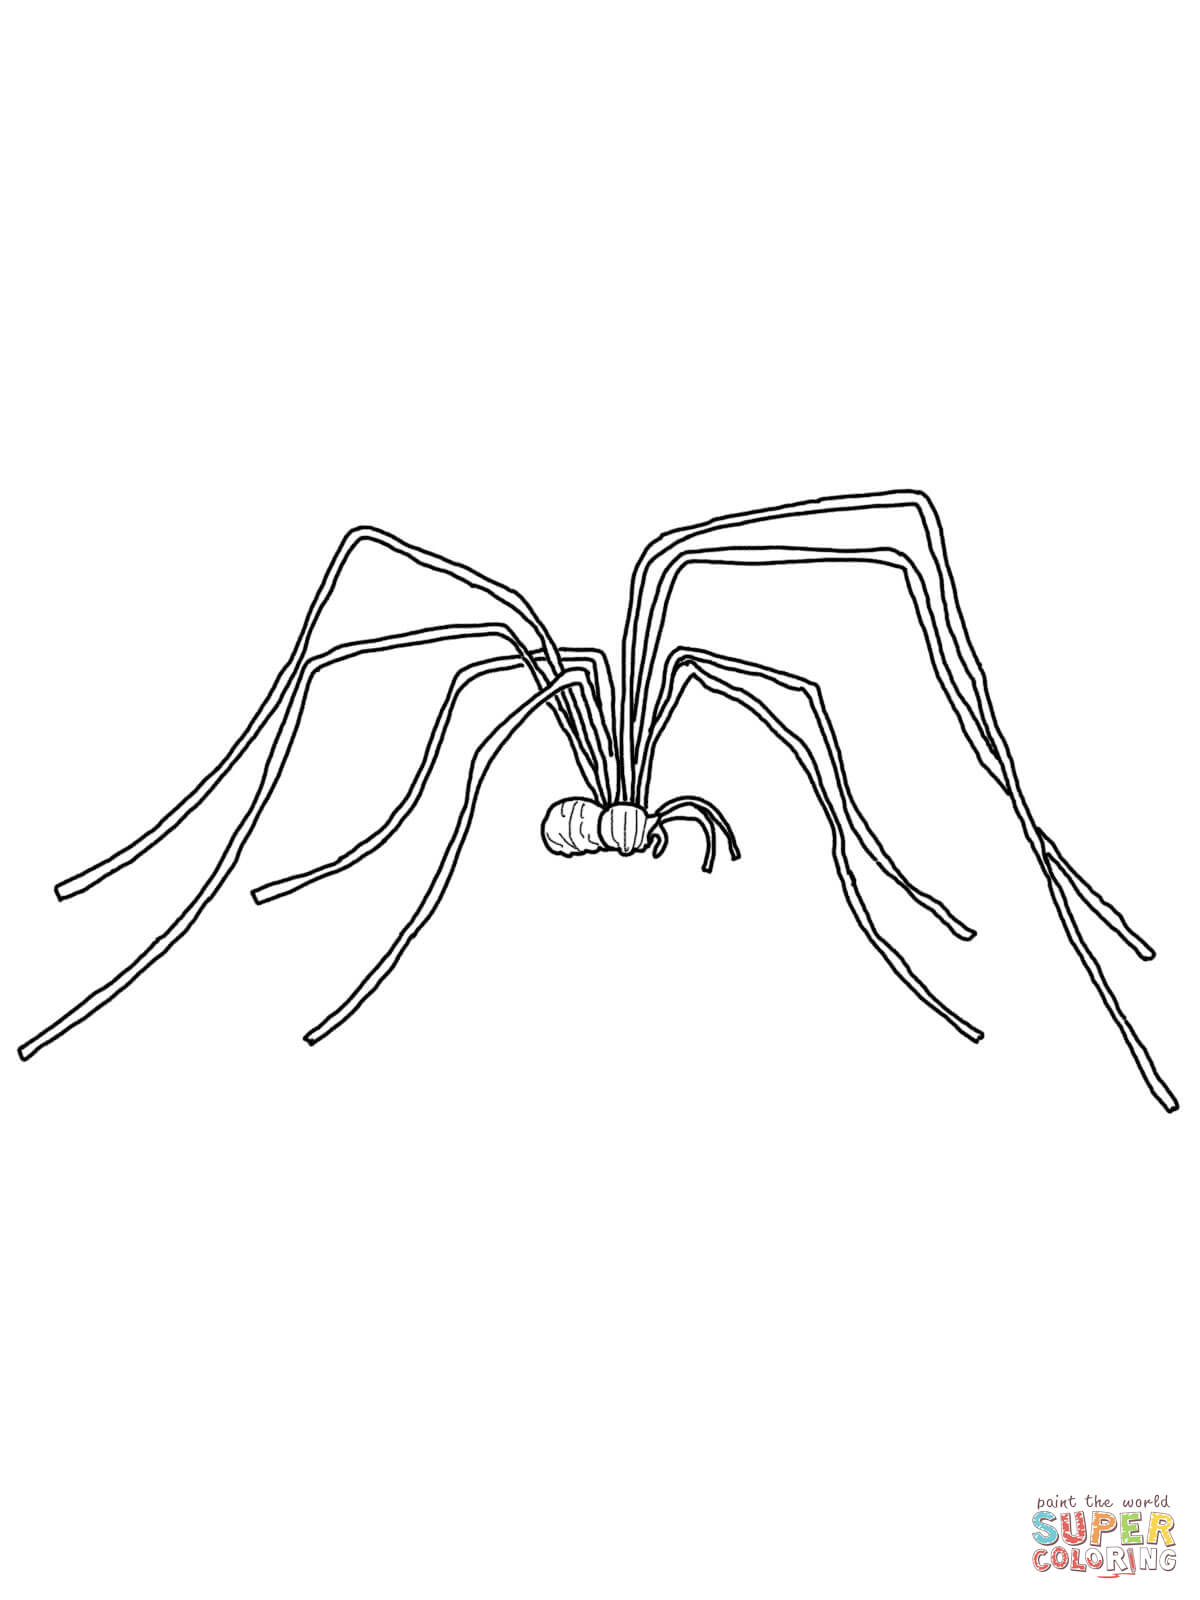 Daddy Long Legs coloring page